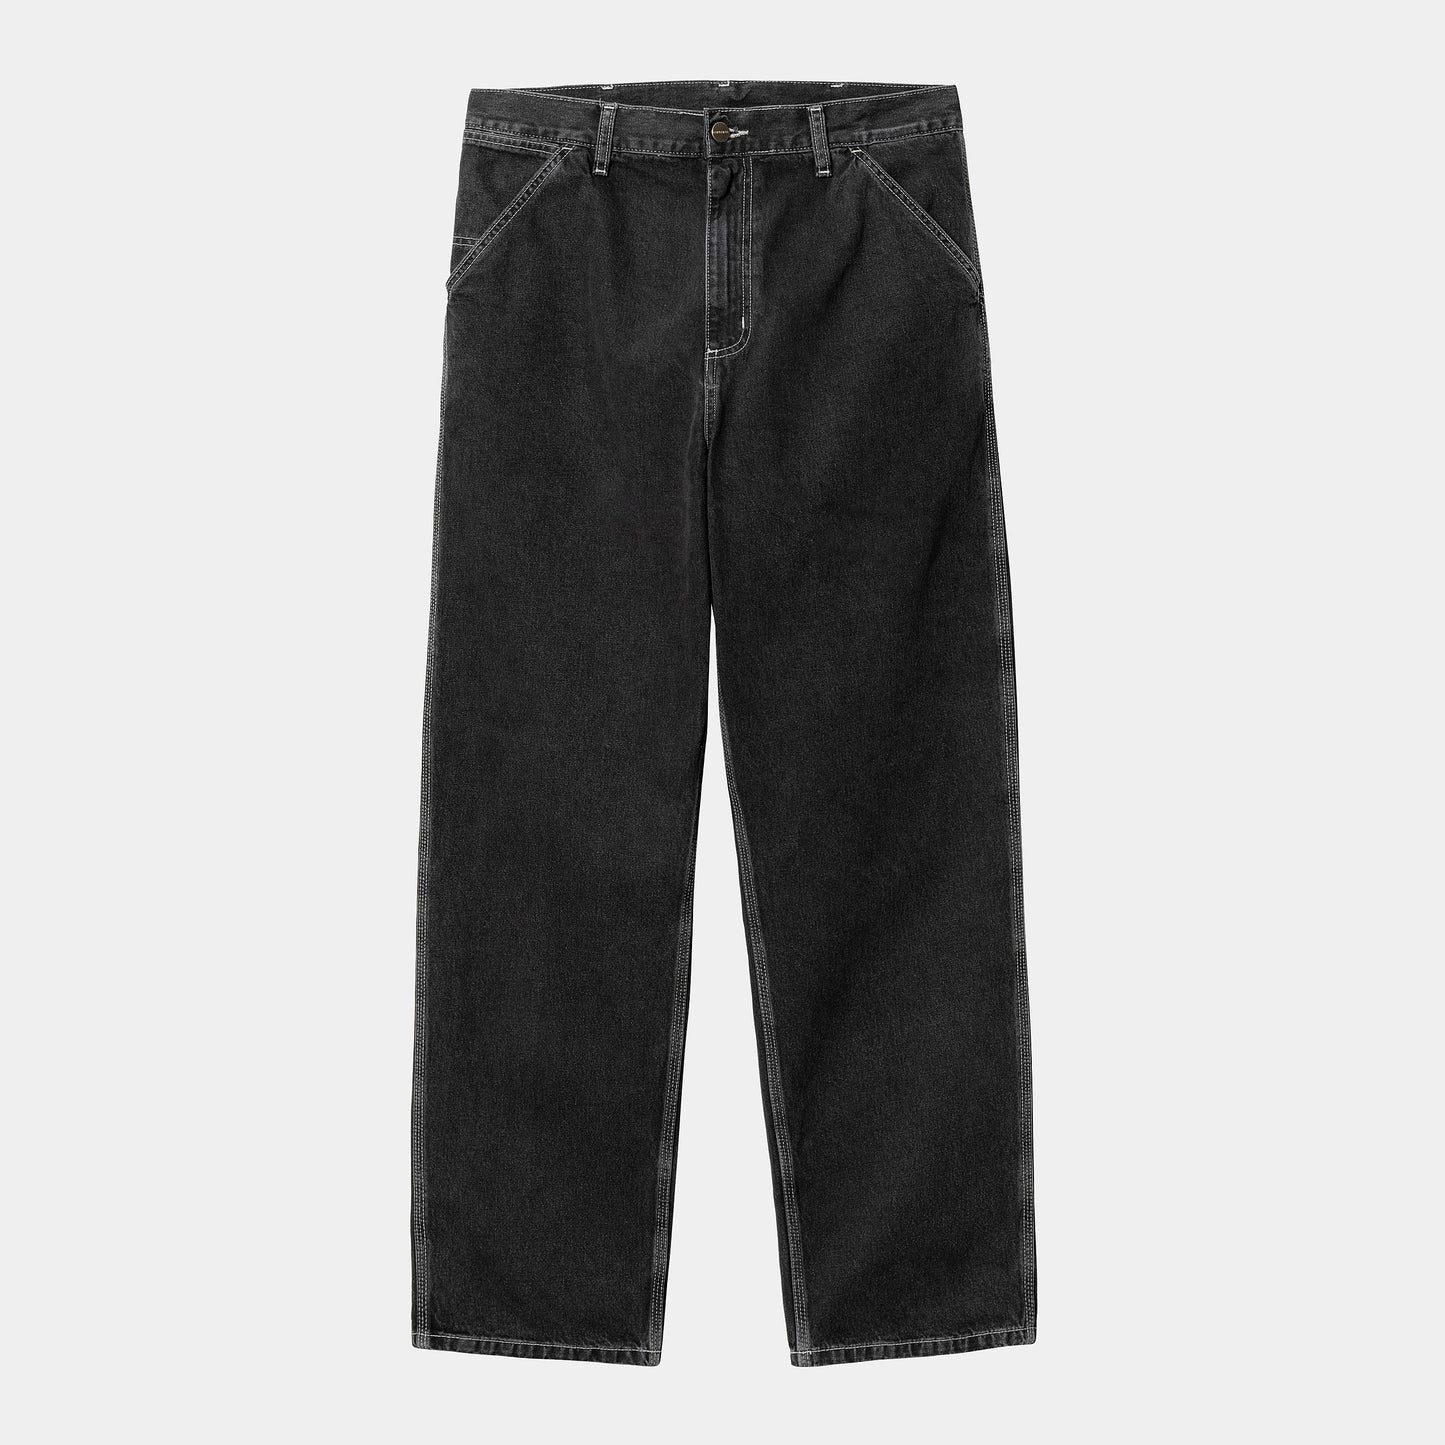 Carhartt - Simple Pant Black Stone Washed